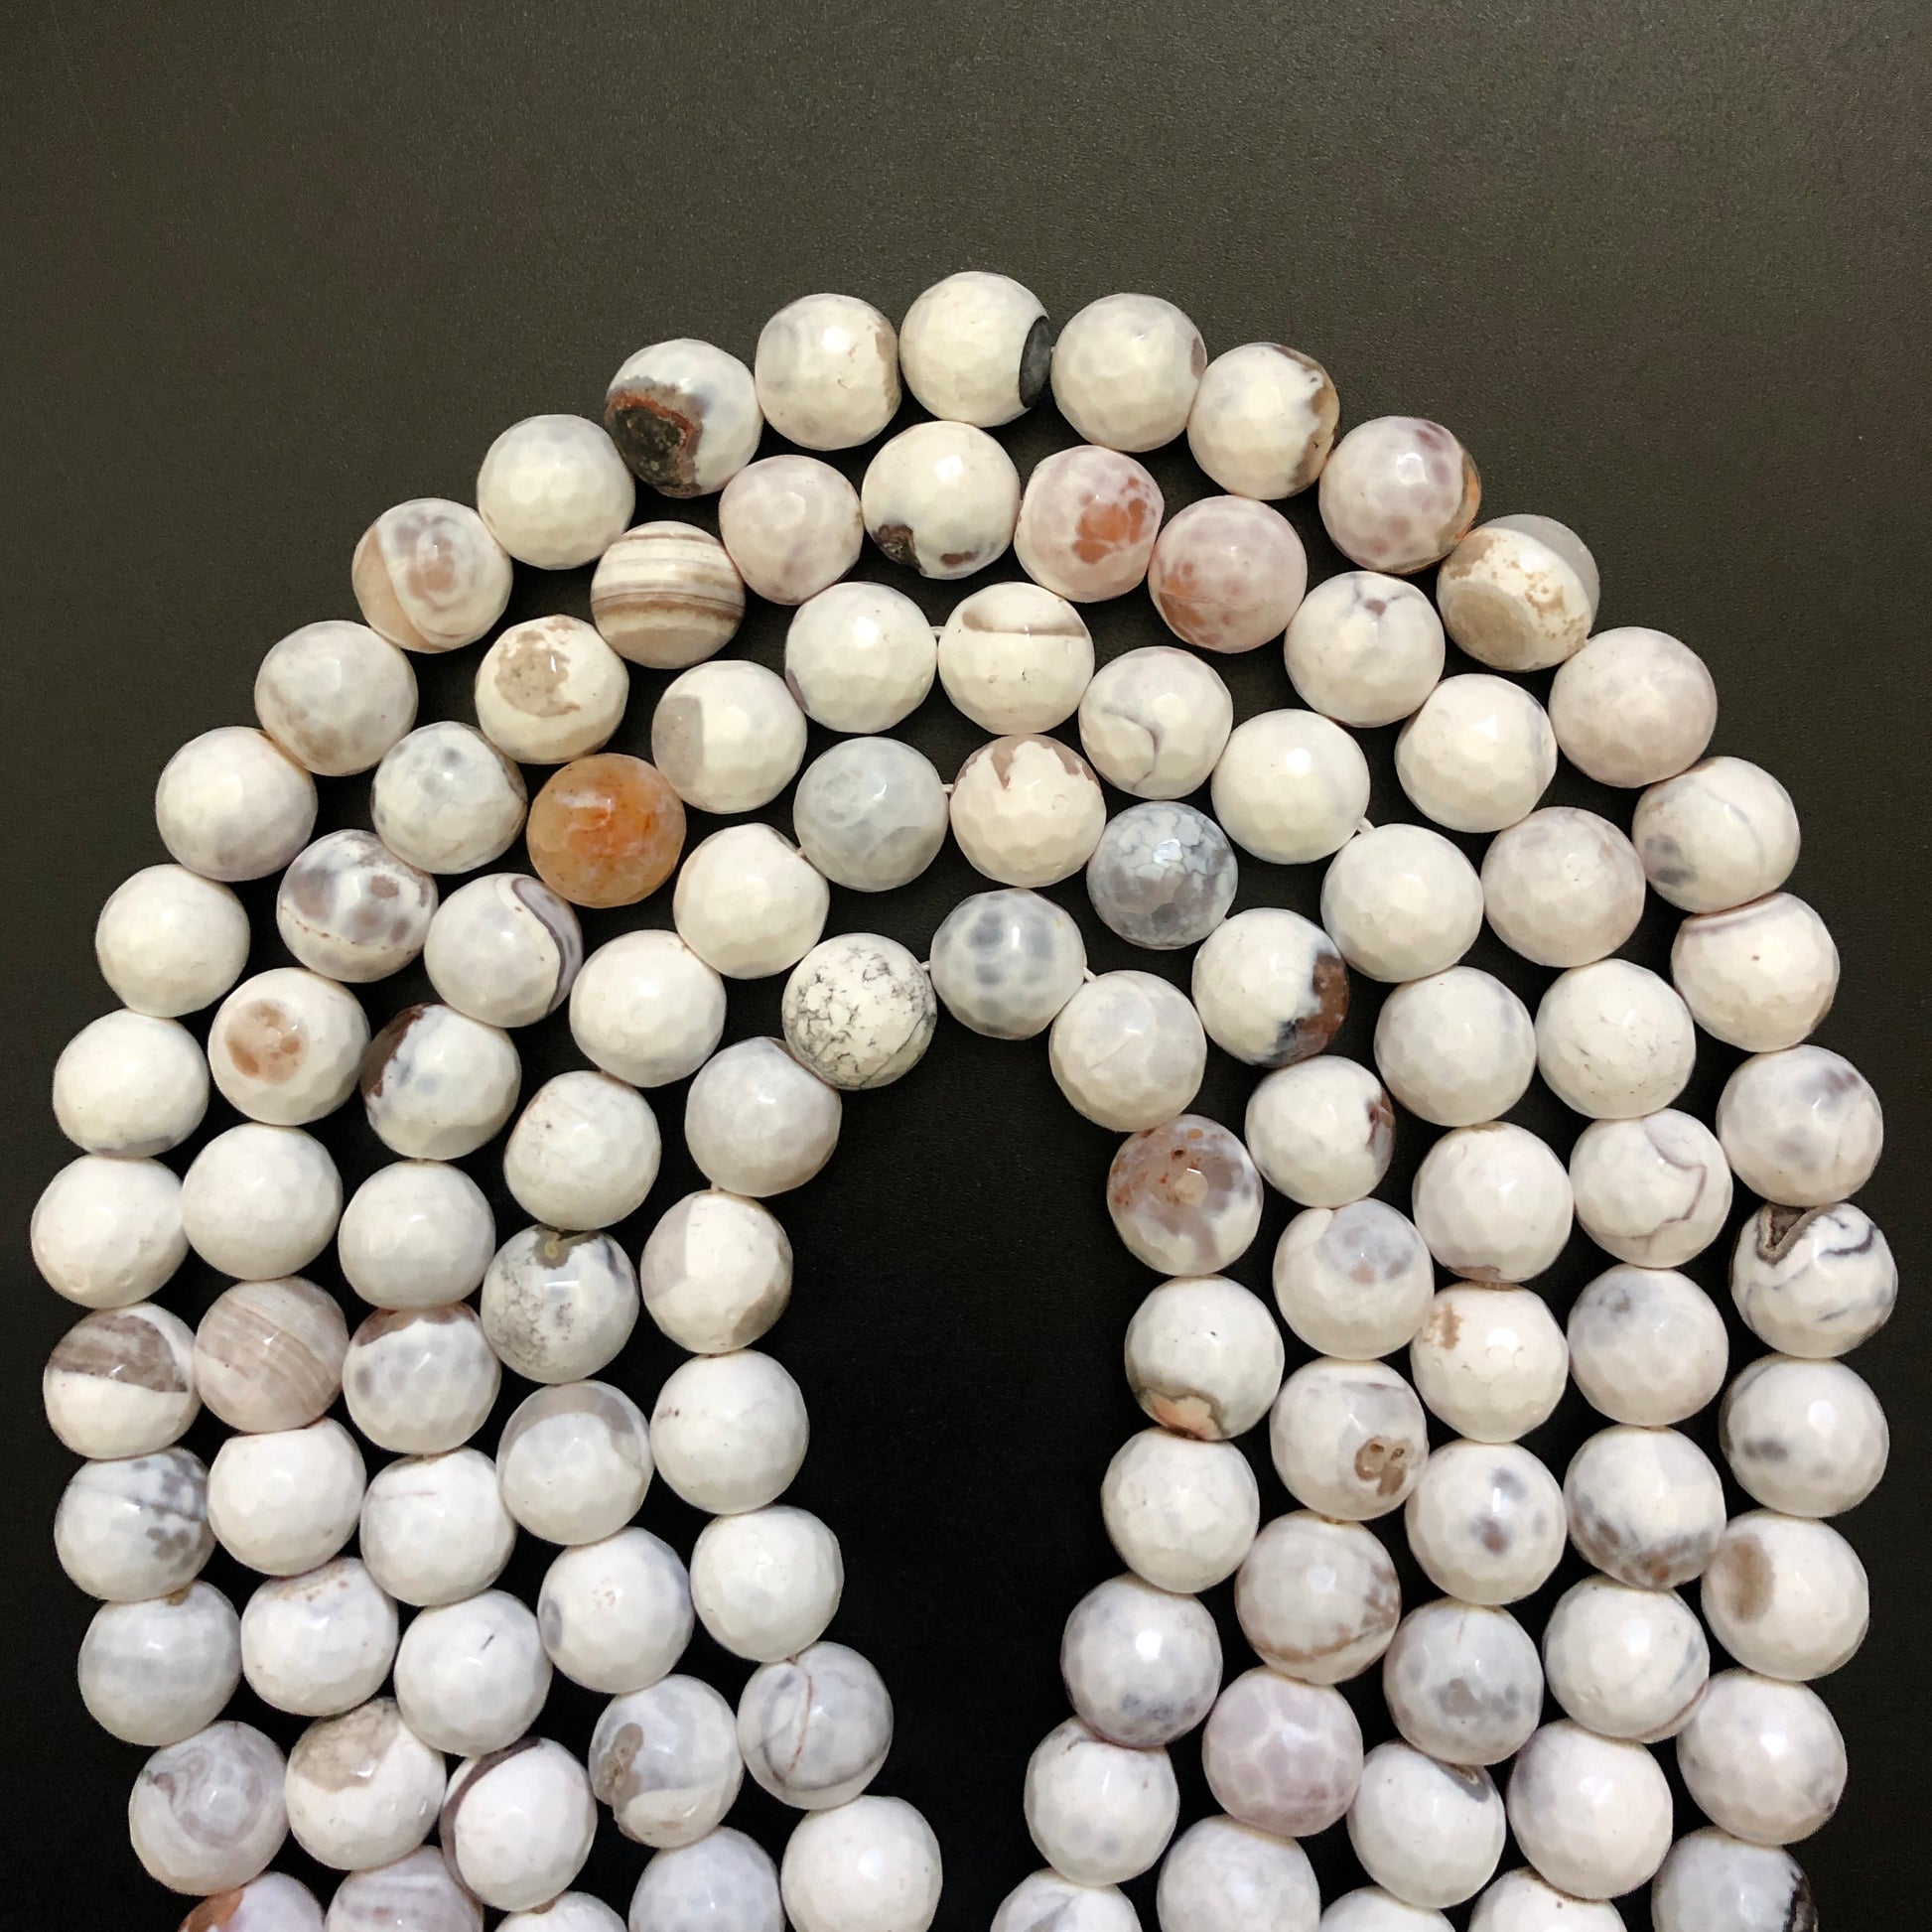 2 Strands/lot 12mm White Faceted Fire Agate Stone Beads Stone Beads 12mm Stone Beads Faceted Agate Beads New Beads Arrivals Charms Beads Beyond